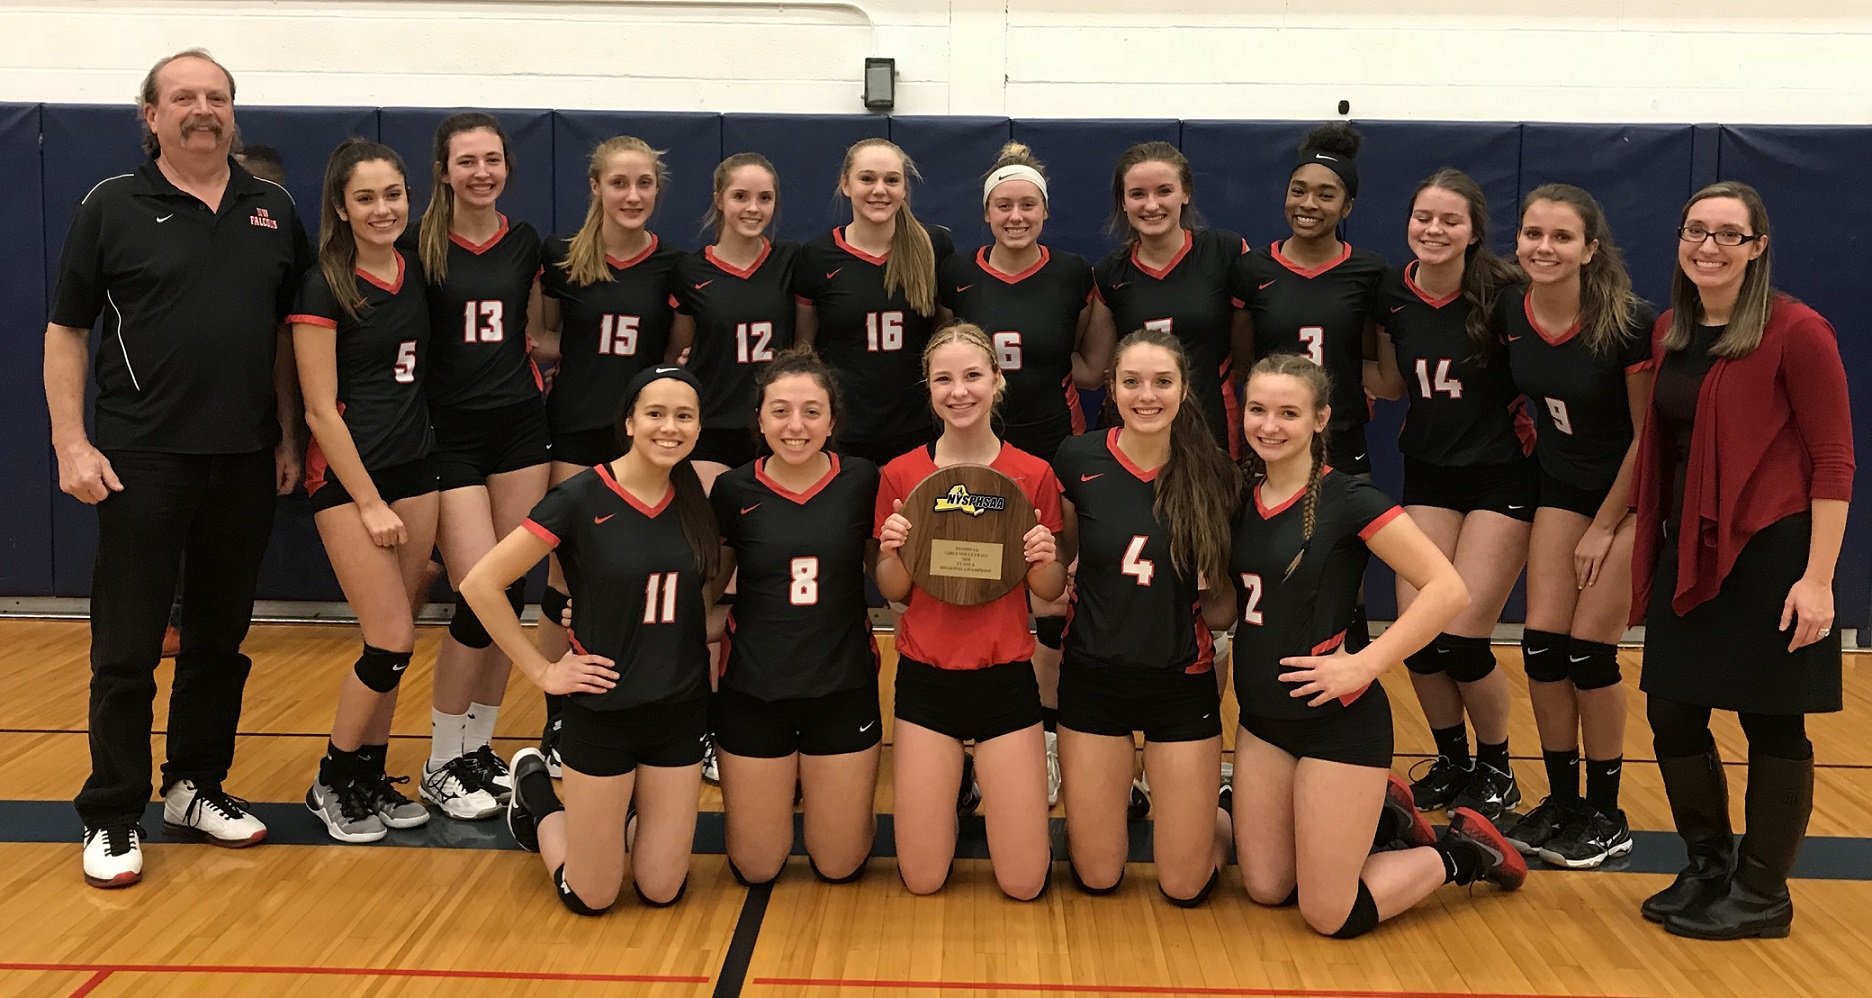 The Niagara-Wheatfield girls volleyball team poses with its Far West Regional plaque after defeating Irondequoit, 3-1. The win sends the Falcons to the state tournament for the first time in program history. (Photos by David Yarger)